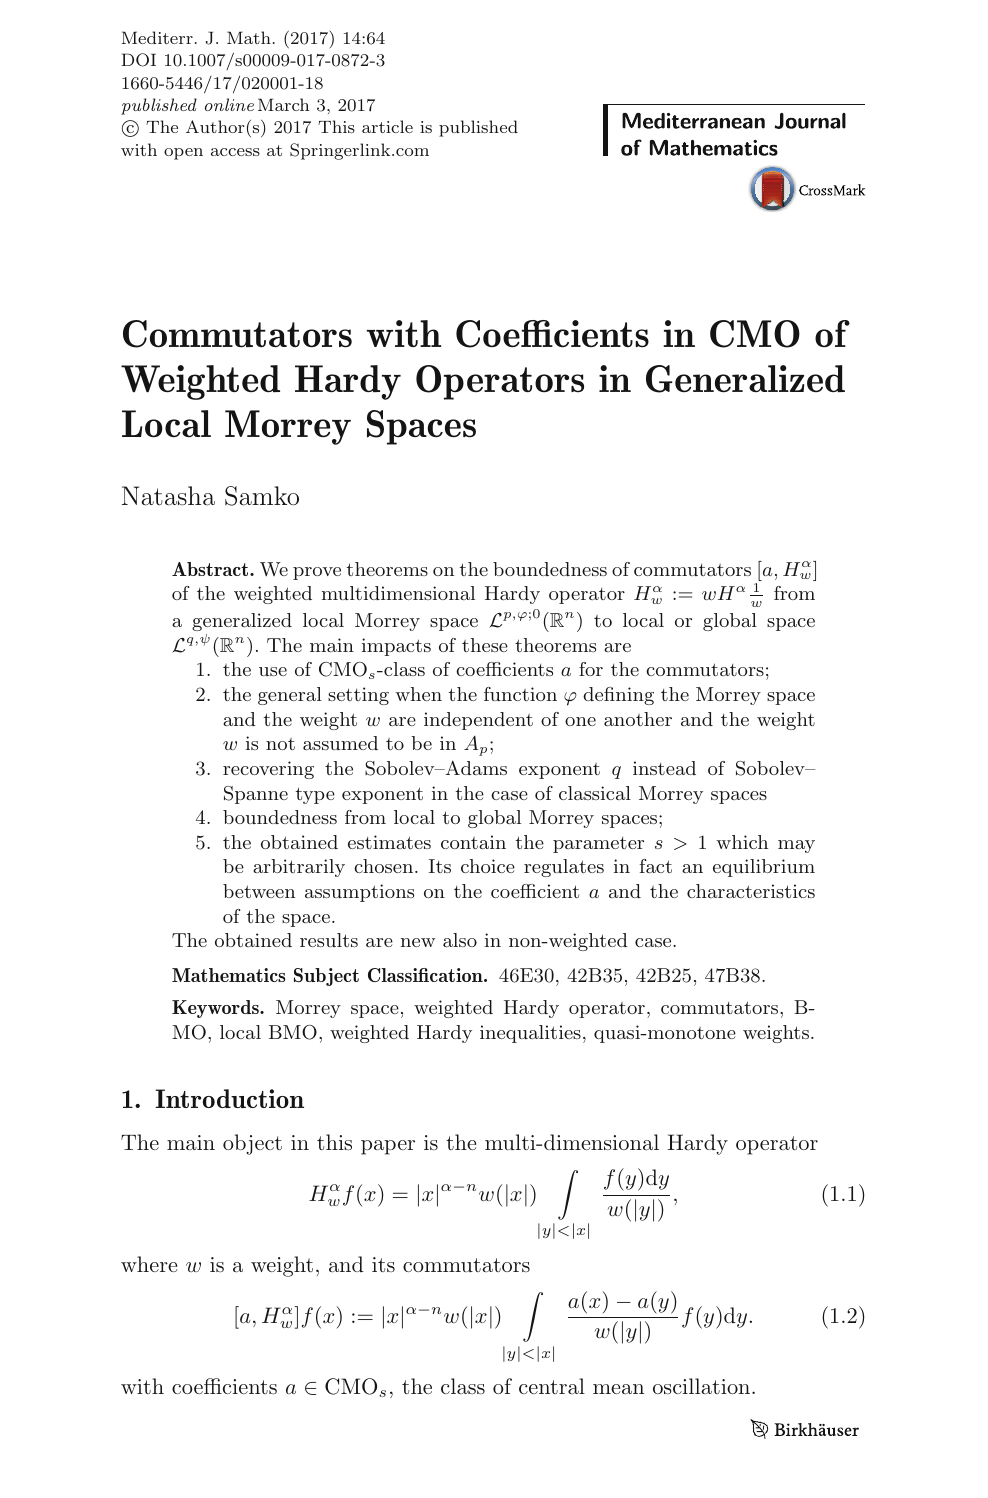 Commutators With Coefficients In Cmo Of Weighted Hardy Operators In Generalized Local Morrey Spaces Topic Of Research Paper In Mathematics Download Scholarly Article Pdf And Read For Free On Cyberleninka Open